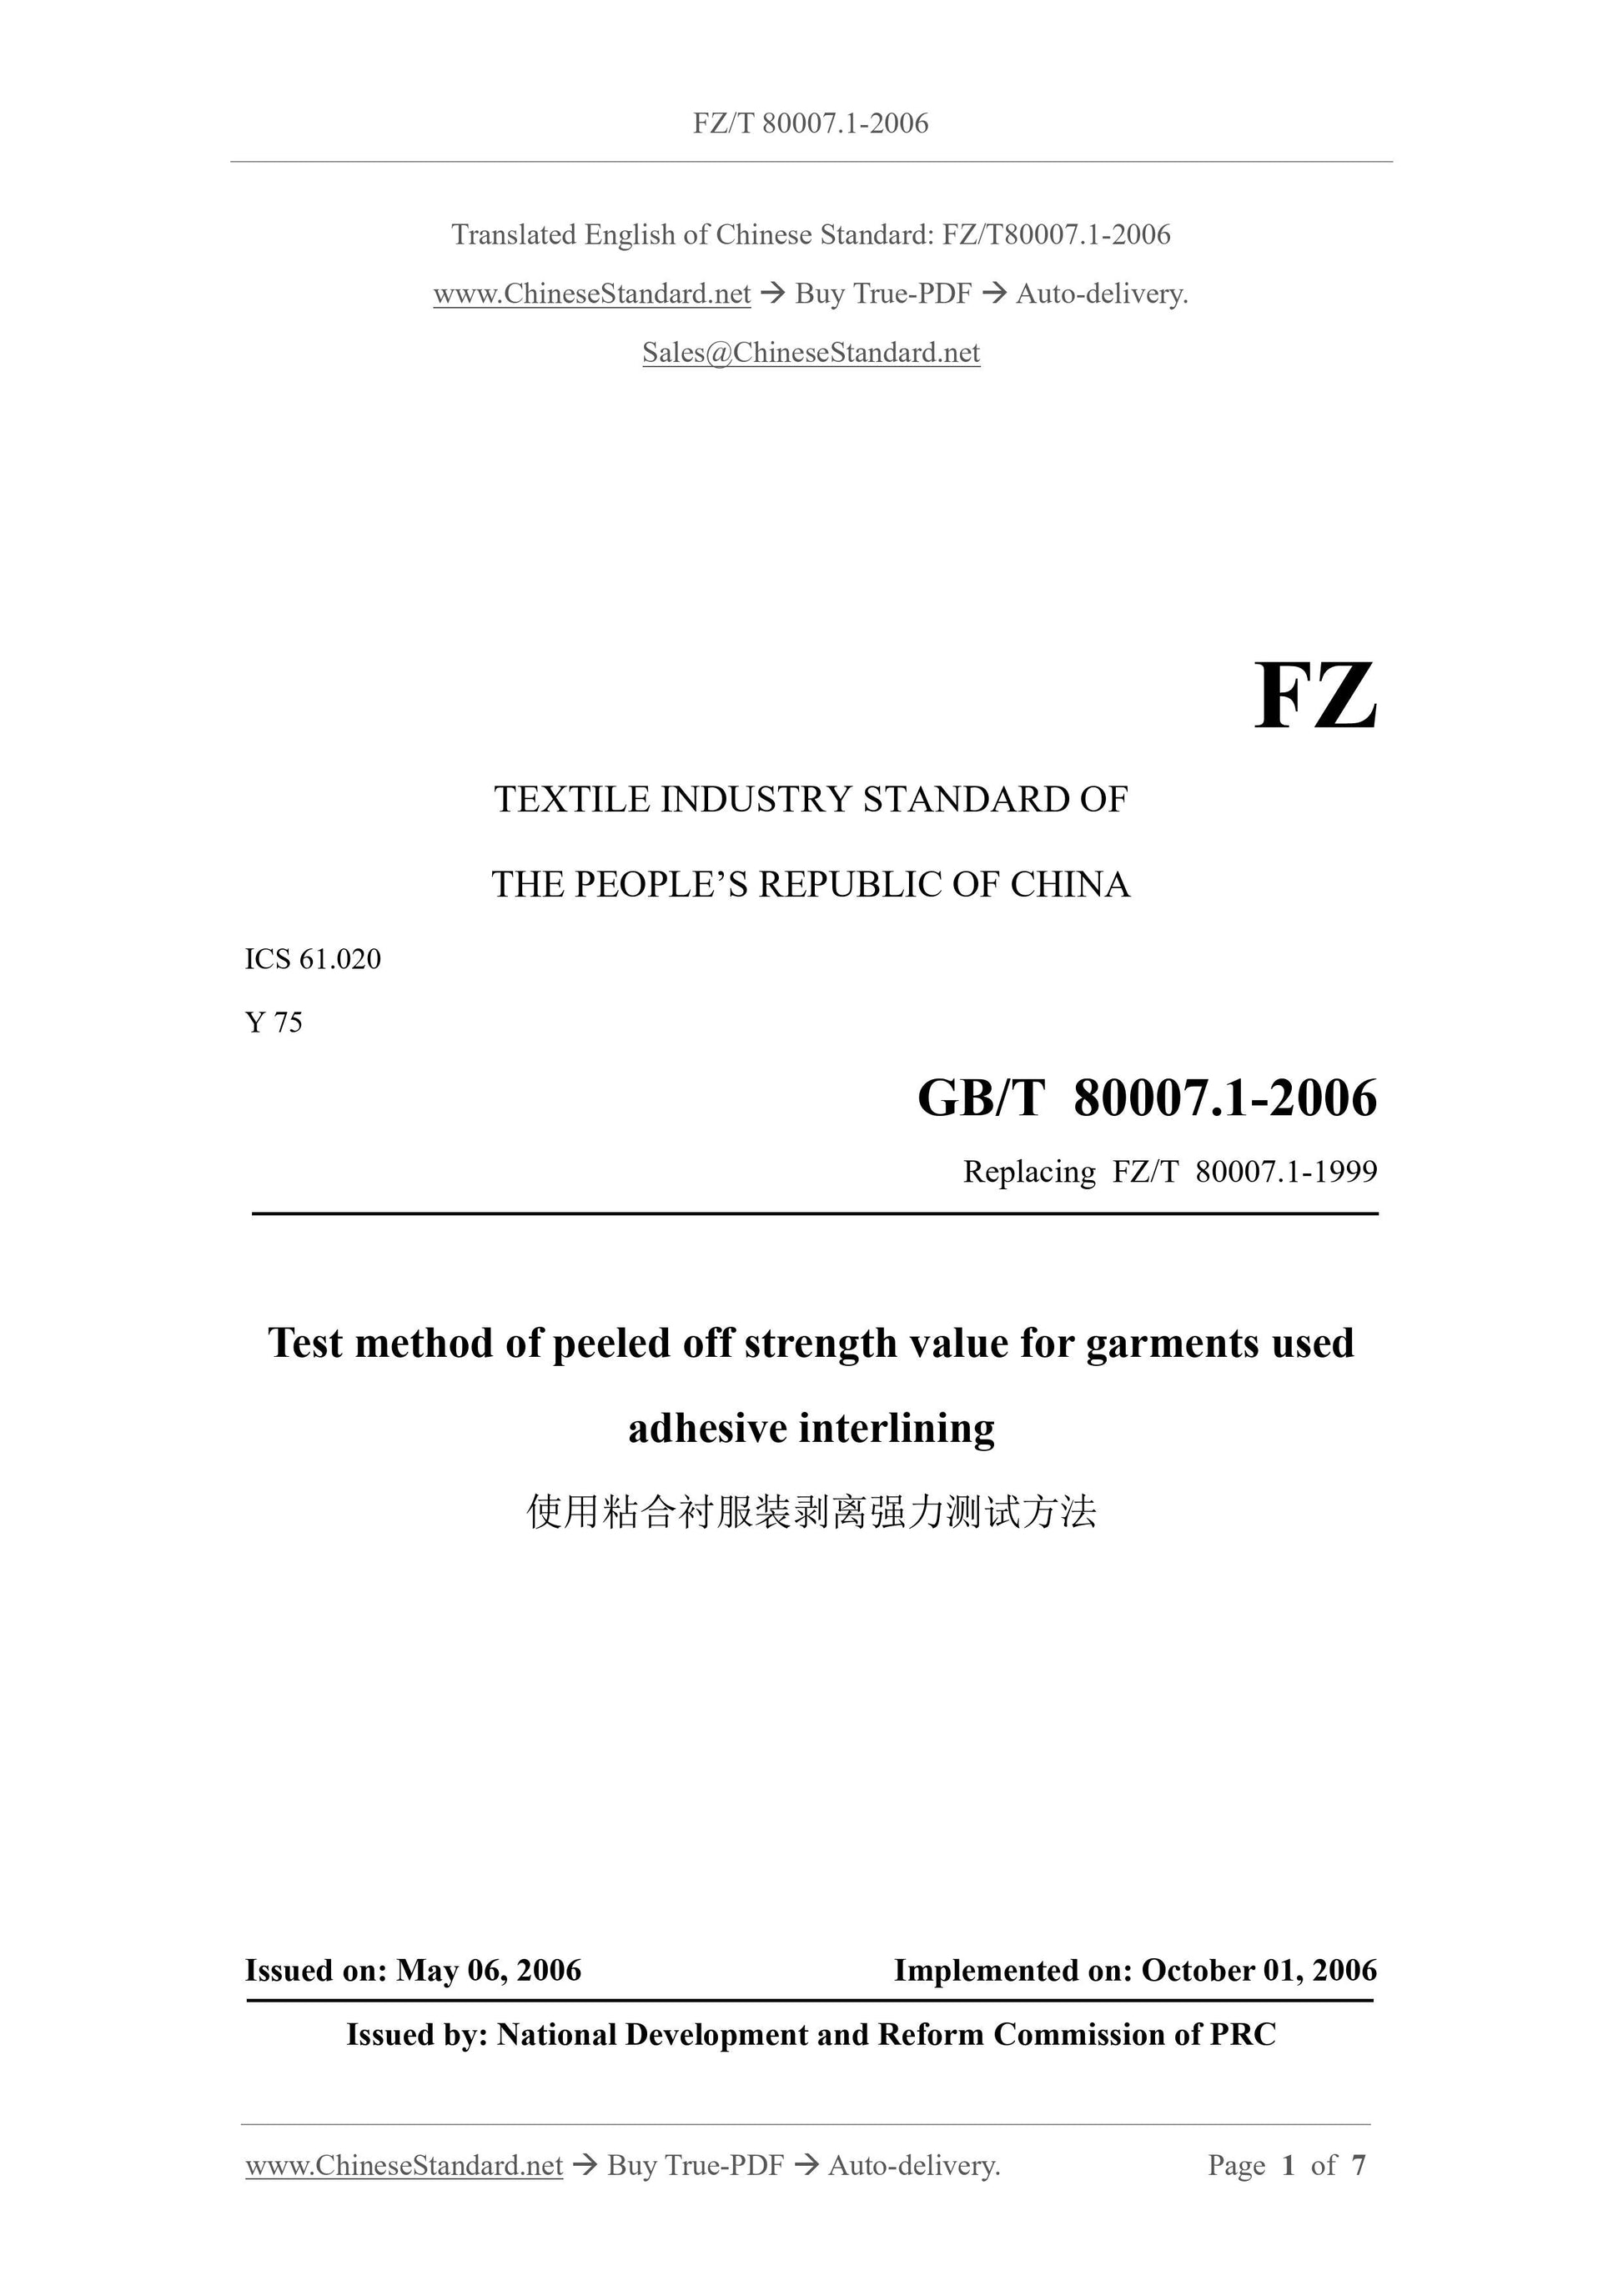 FZ/T 80007.1-2006 Page 1